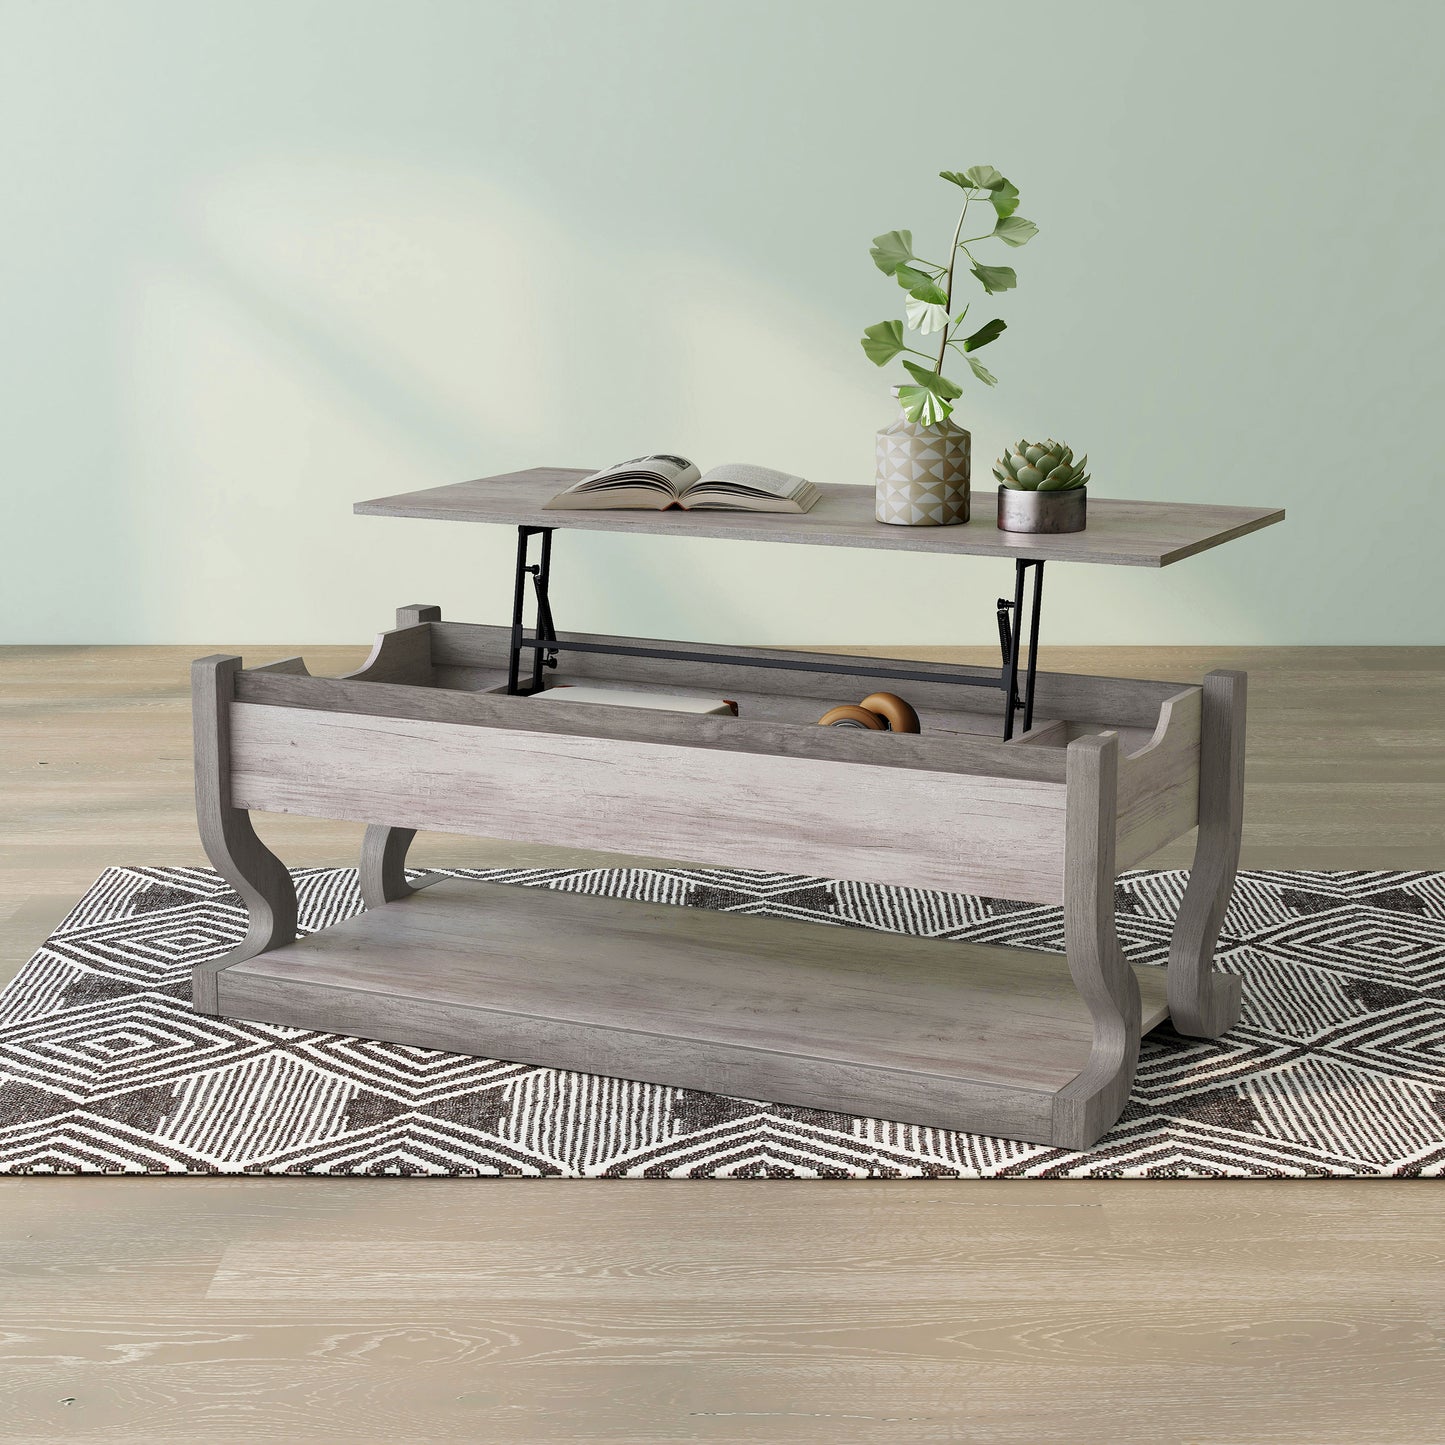 Left angled transitional coastal white lift-top coffee table with storage and top raised on an area rug with accessories